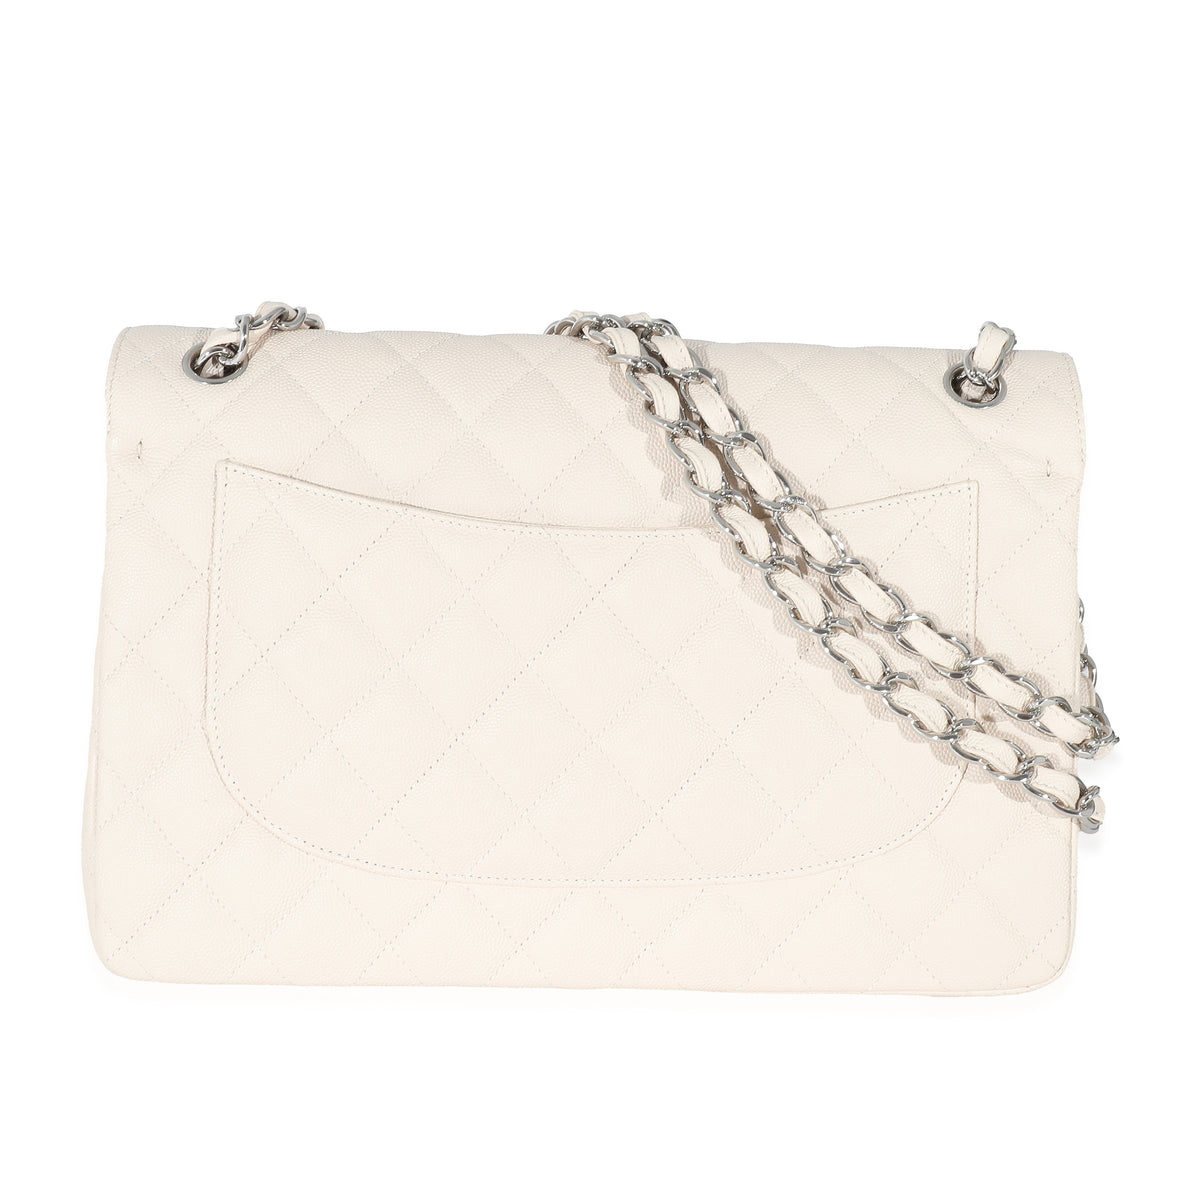 Chanel Cream Quilted Caviar Jumbo Classic Double Flap Bag, myGemma